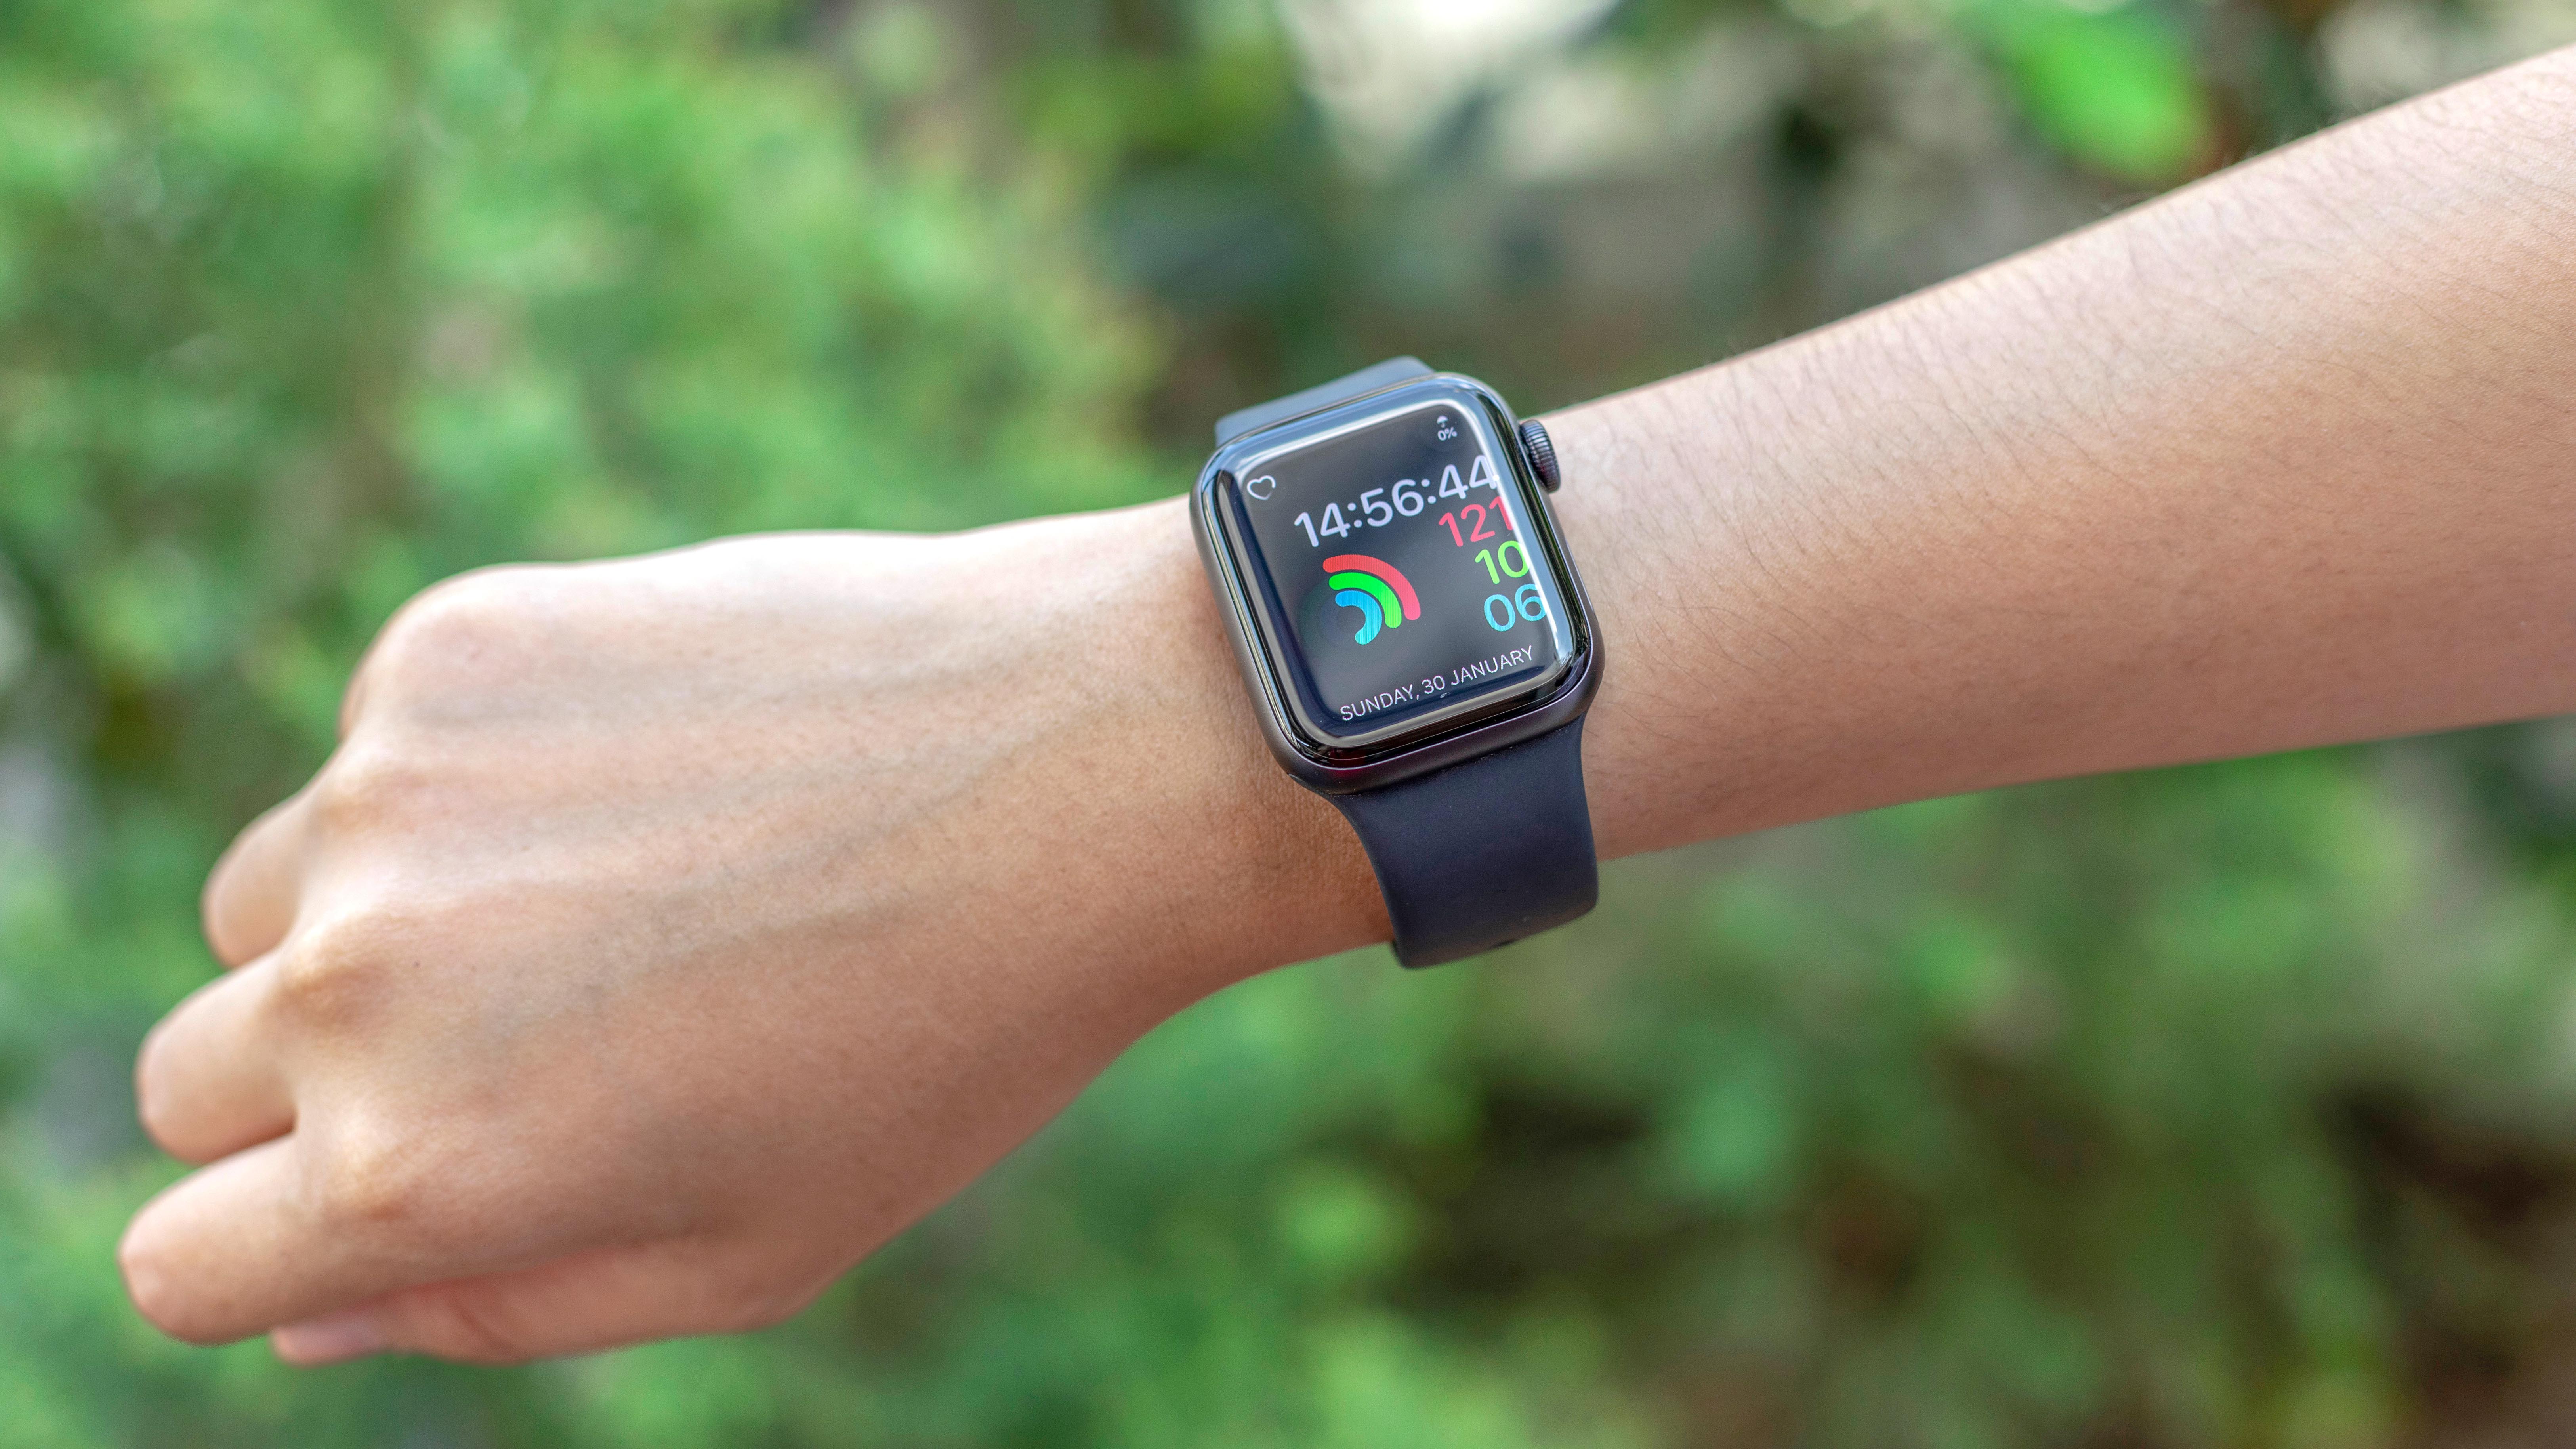 Your Apple Watch will display your fitness stats on your wrist